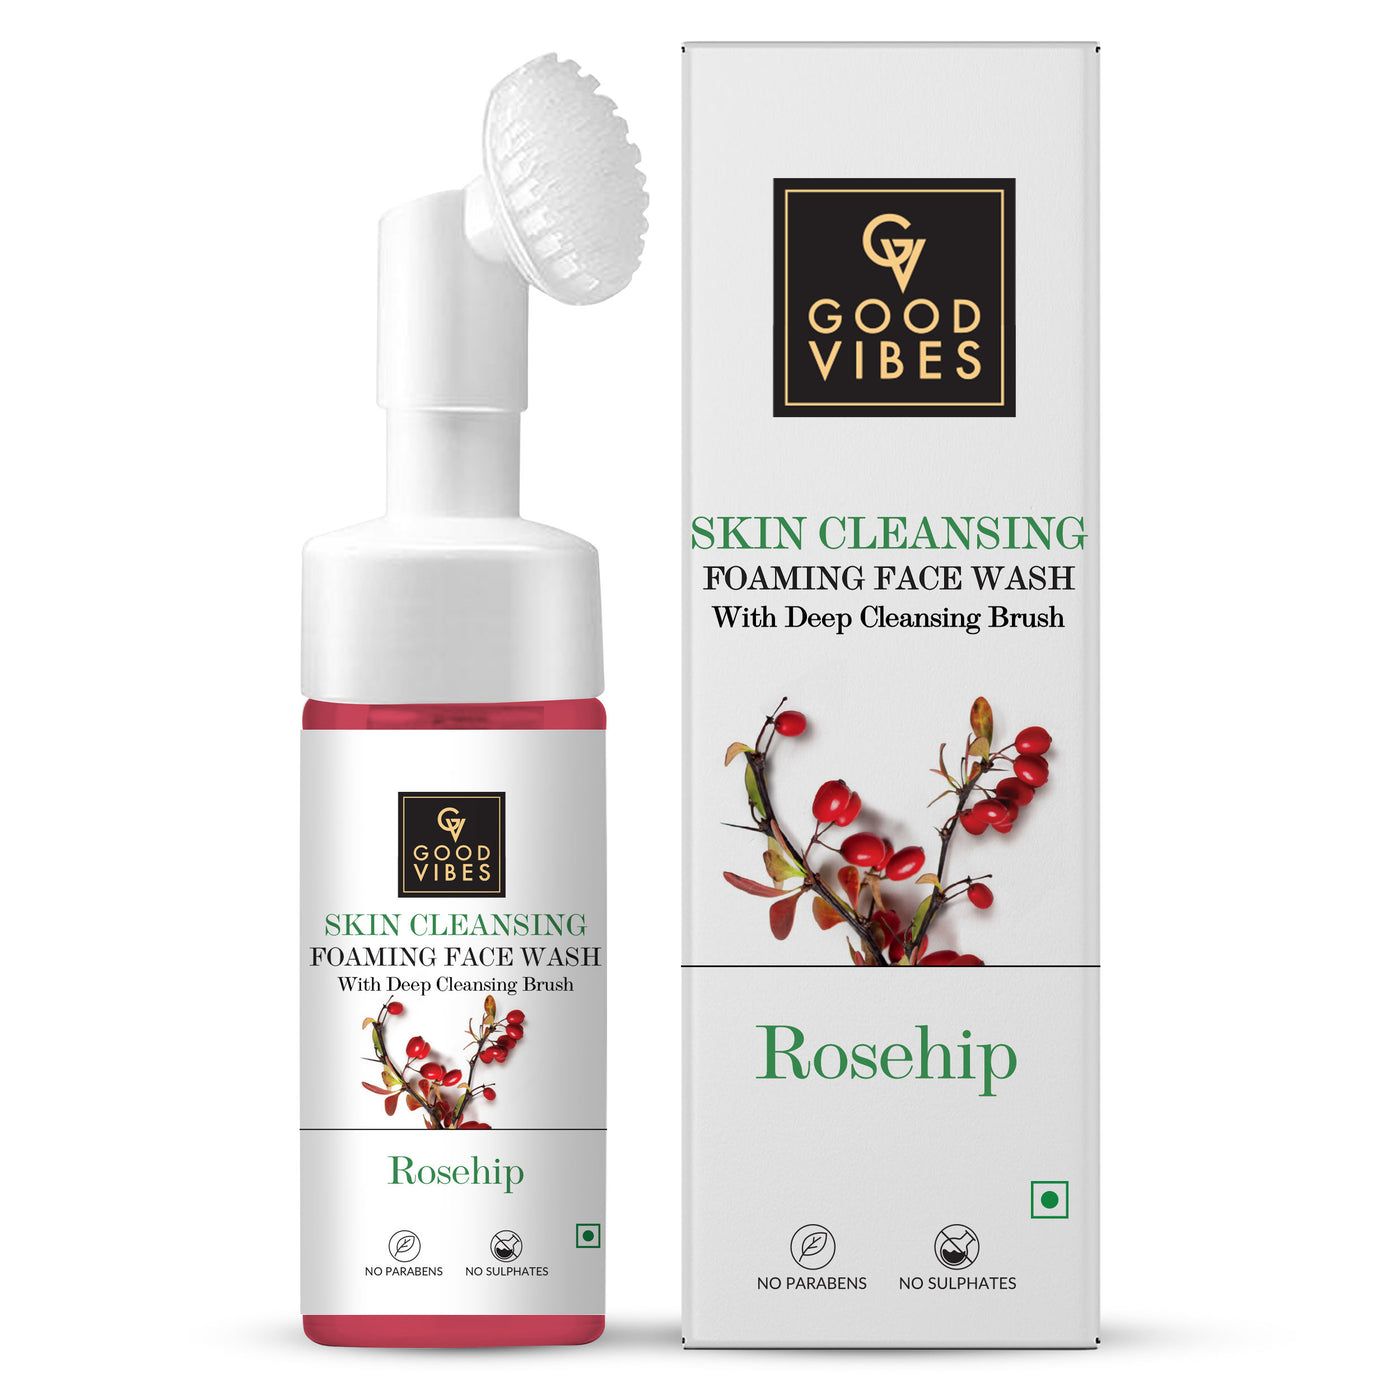 good-vibes-rosehip-skin-cleansing-foaming-face-wash-with-deep-cleansing-brush-150-ml-9